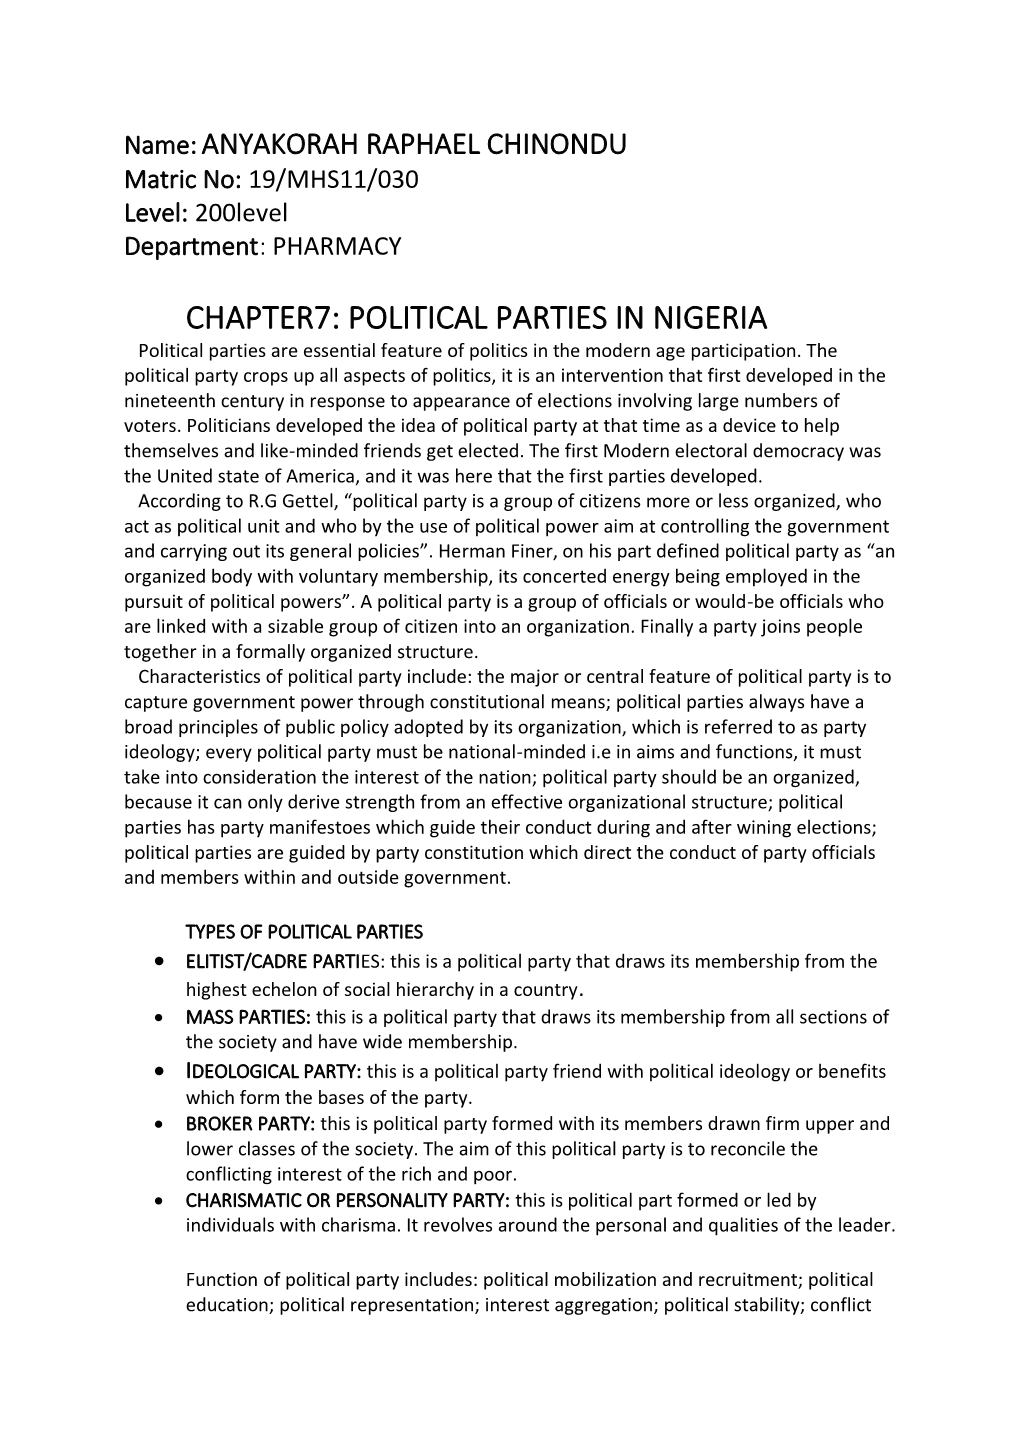 CHAPTER7: POLITICAL PARTIES in NIGERIA Political Parties Are Essential Feature of Politics in the Modern Age Participation